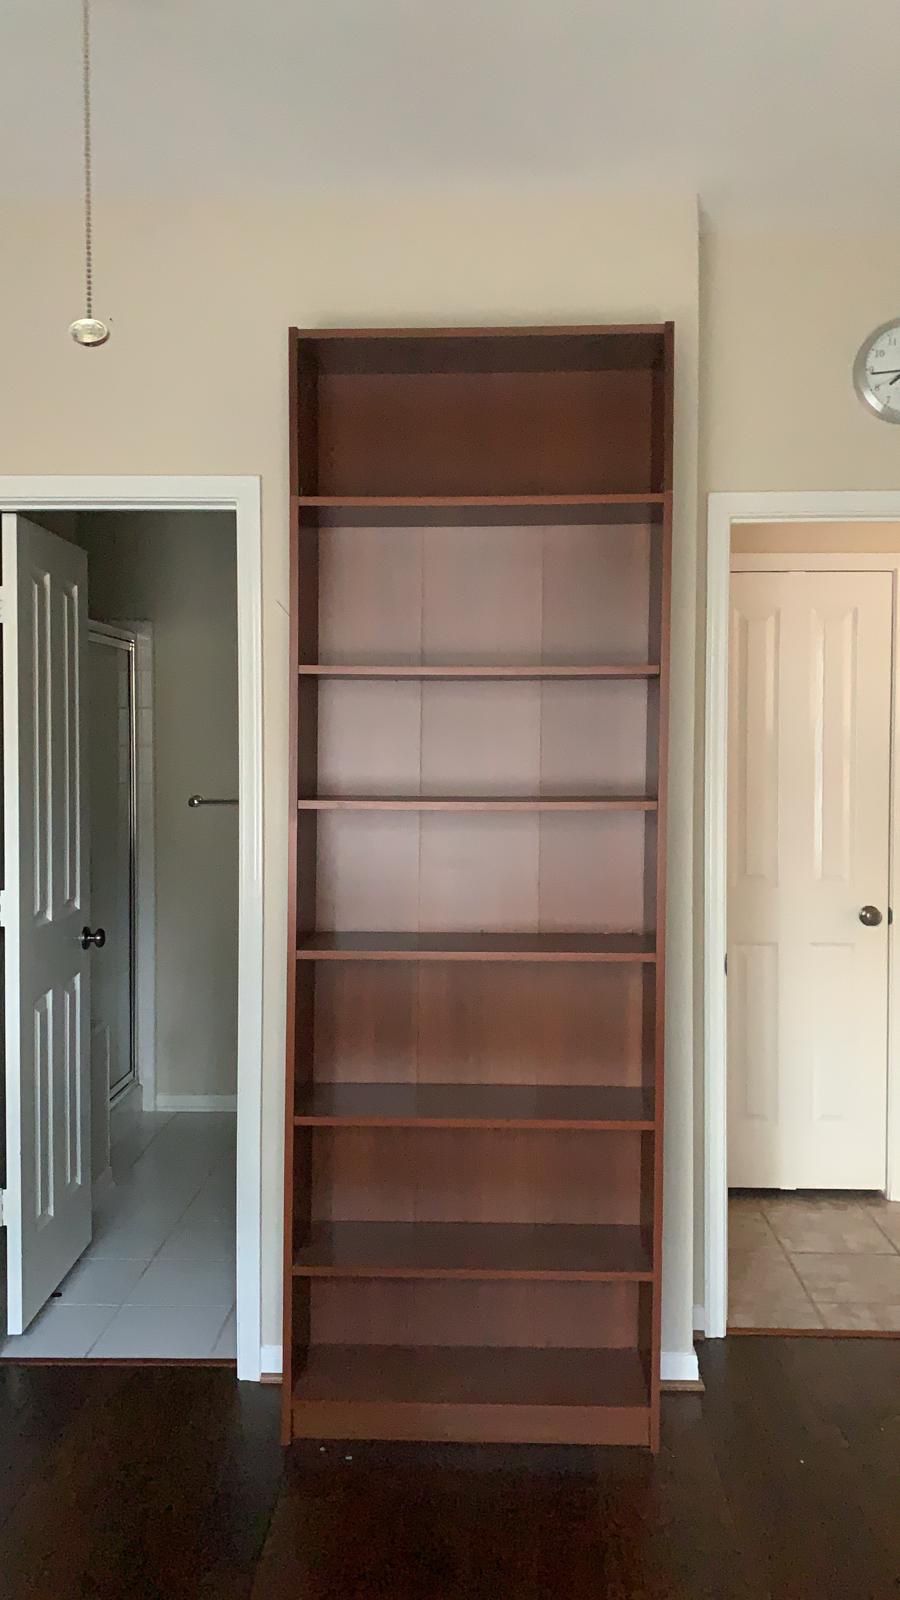 5 IKEA Bookshelves and 1 coffee table! TALL and beautiful -sold separately or all 6 for $150